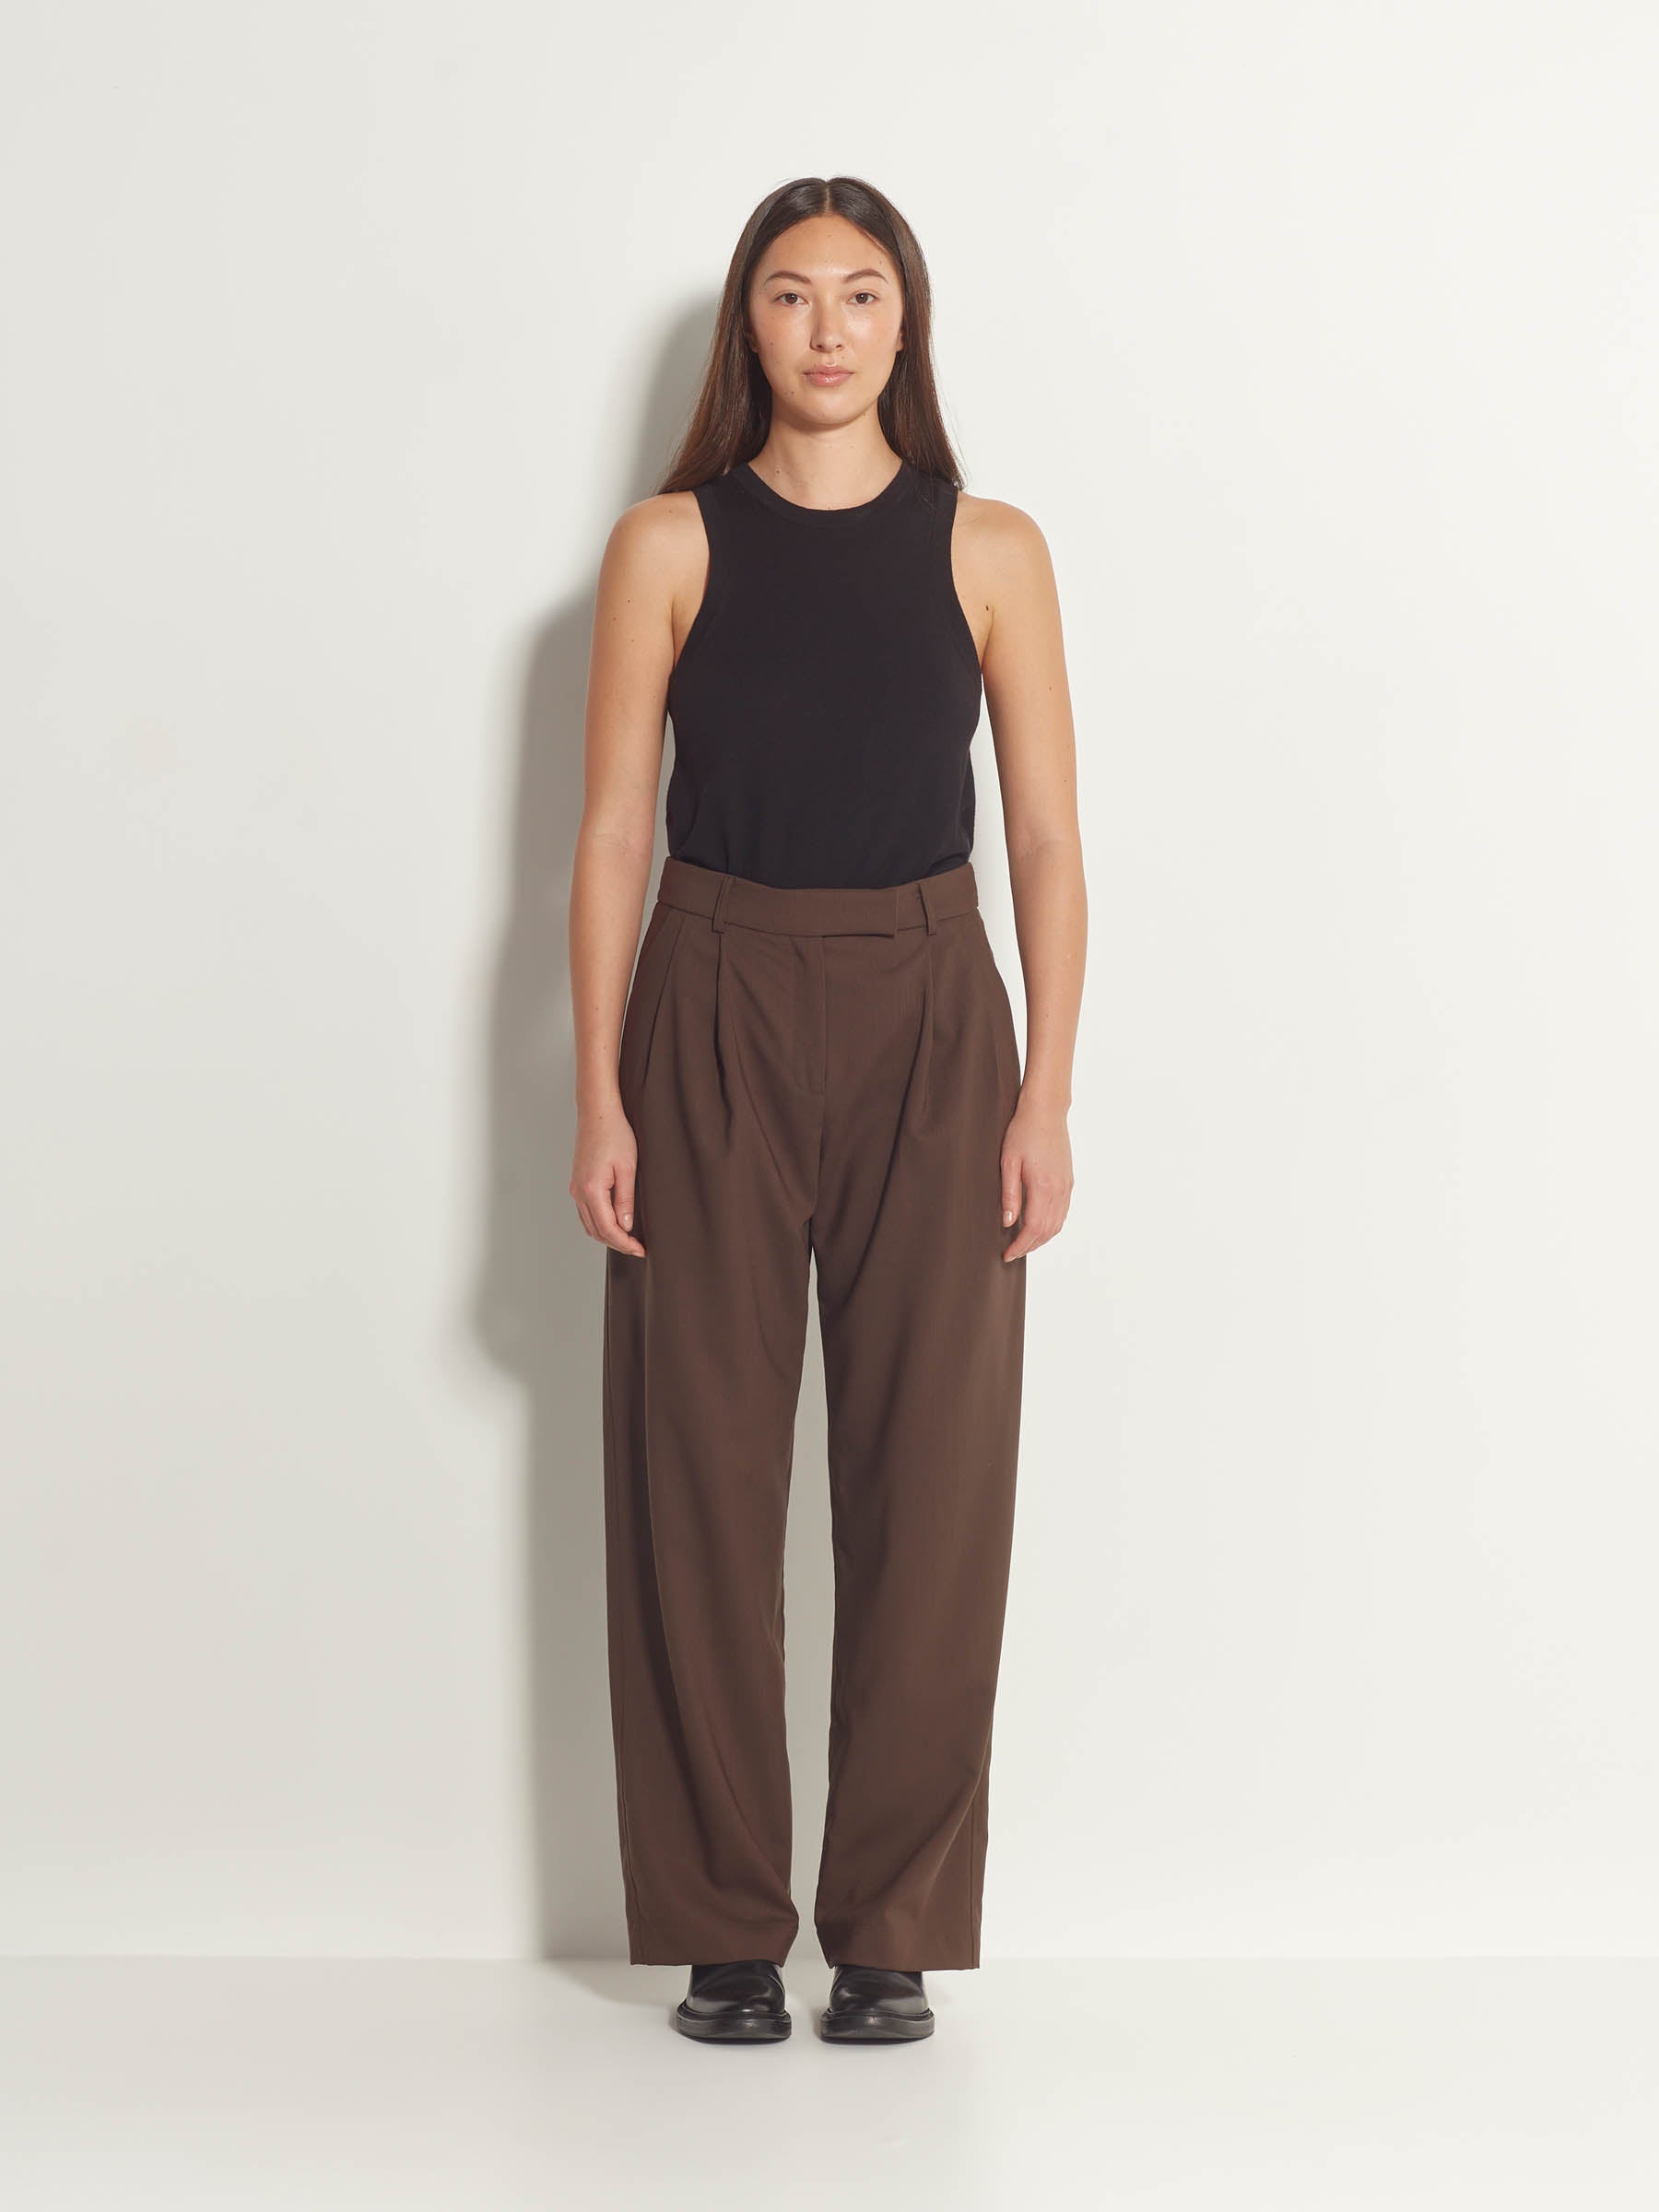 Boyfriend Pant (Wool Stretch Suiting) Chocolate